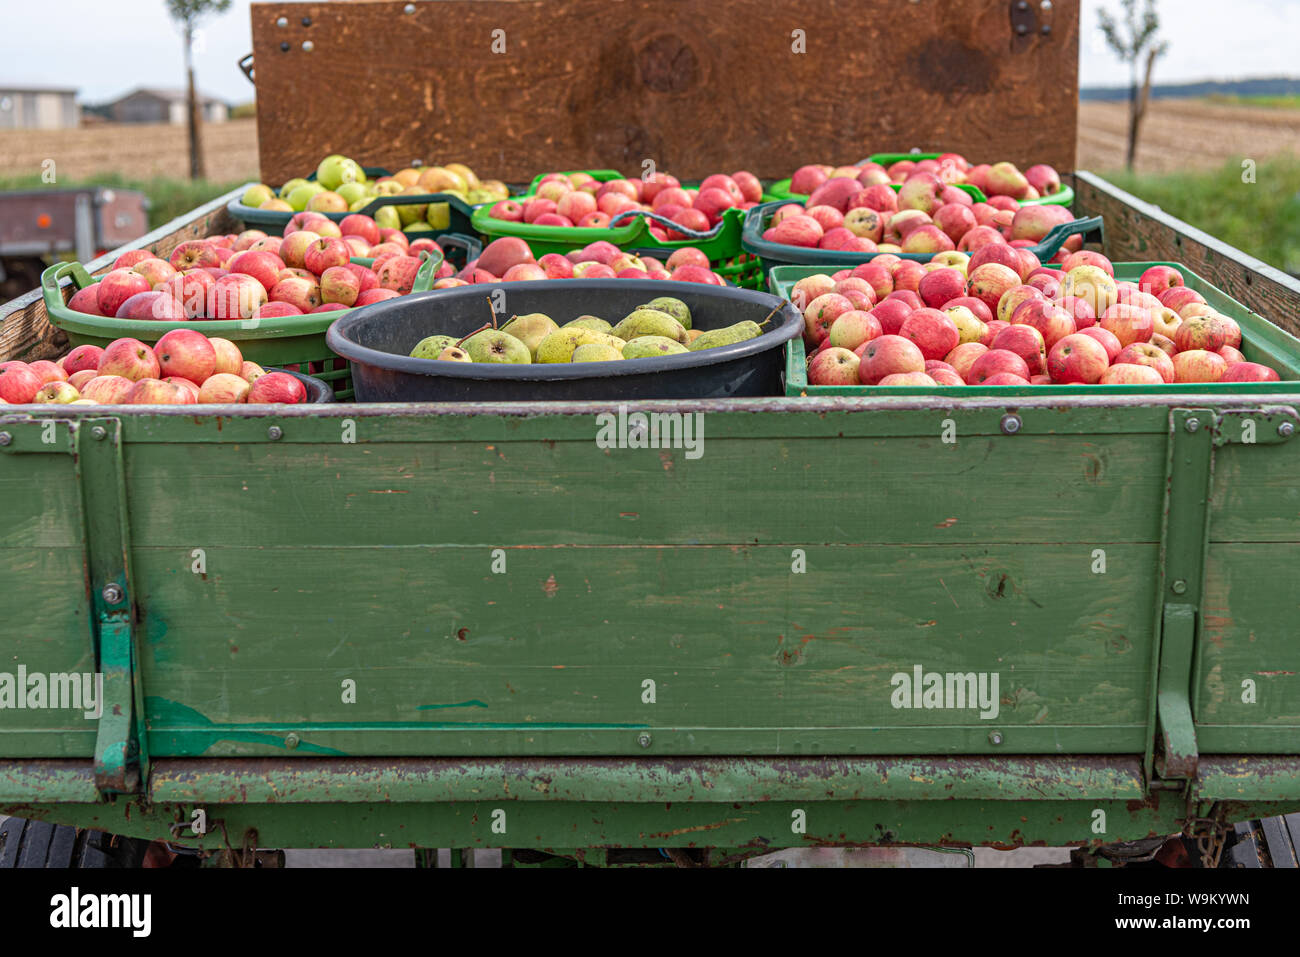 Apple and pears are transported on a front loader after harvesting in autumn. Storage in crates Stock Photo